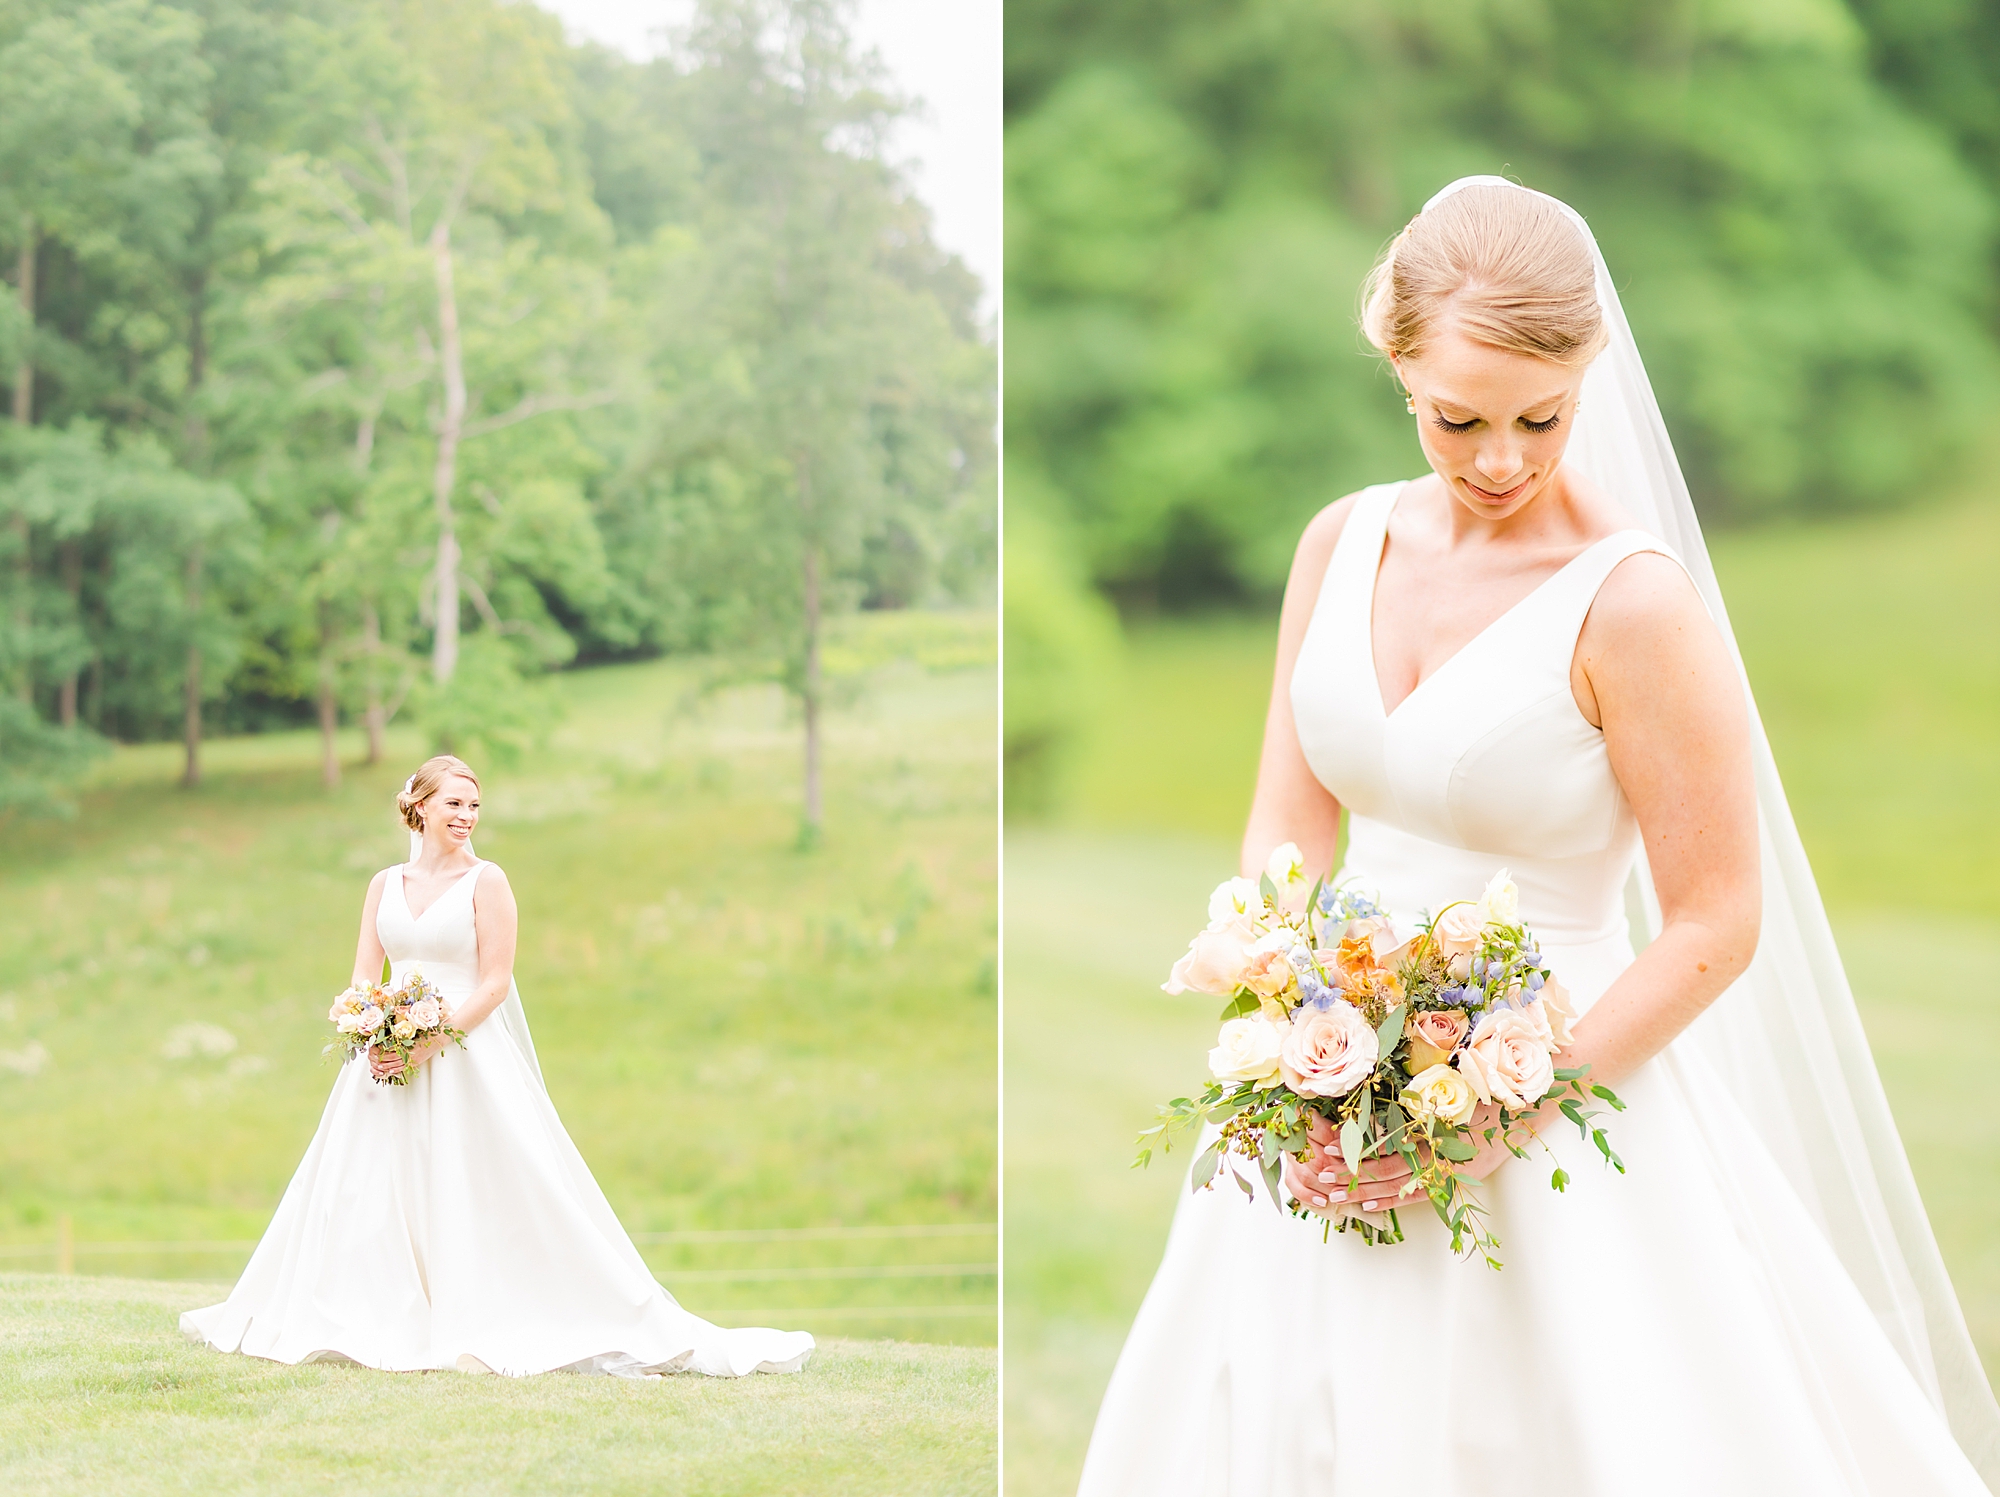 bride-to-be in wedding dress with v-neck looks at bouquet of pastel flowers 